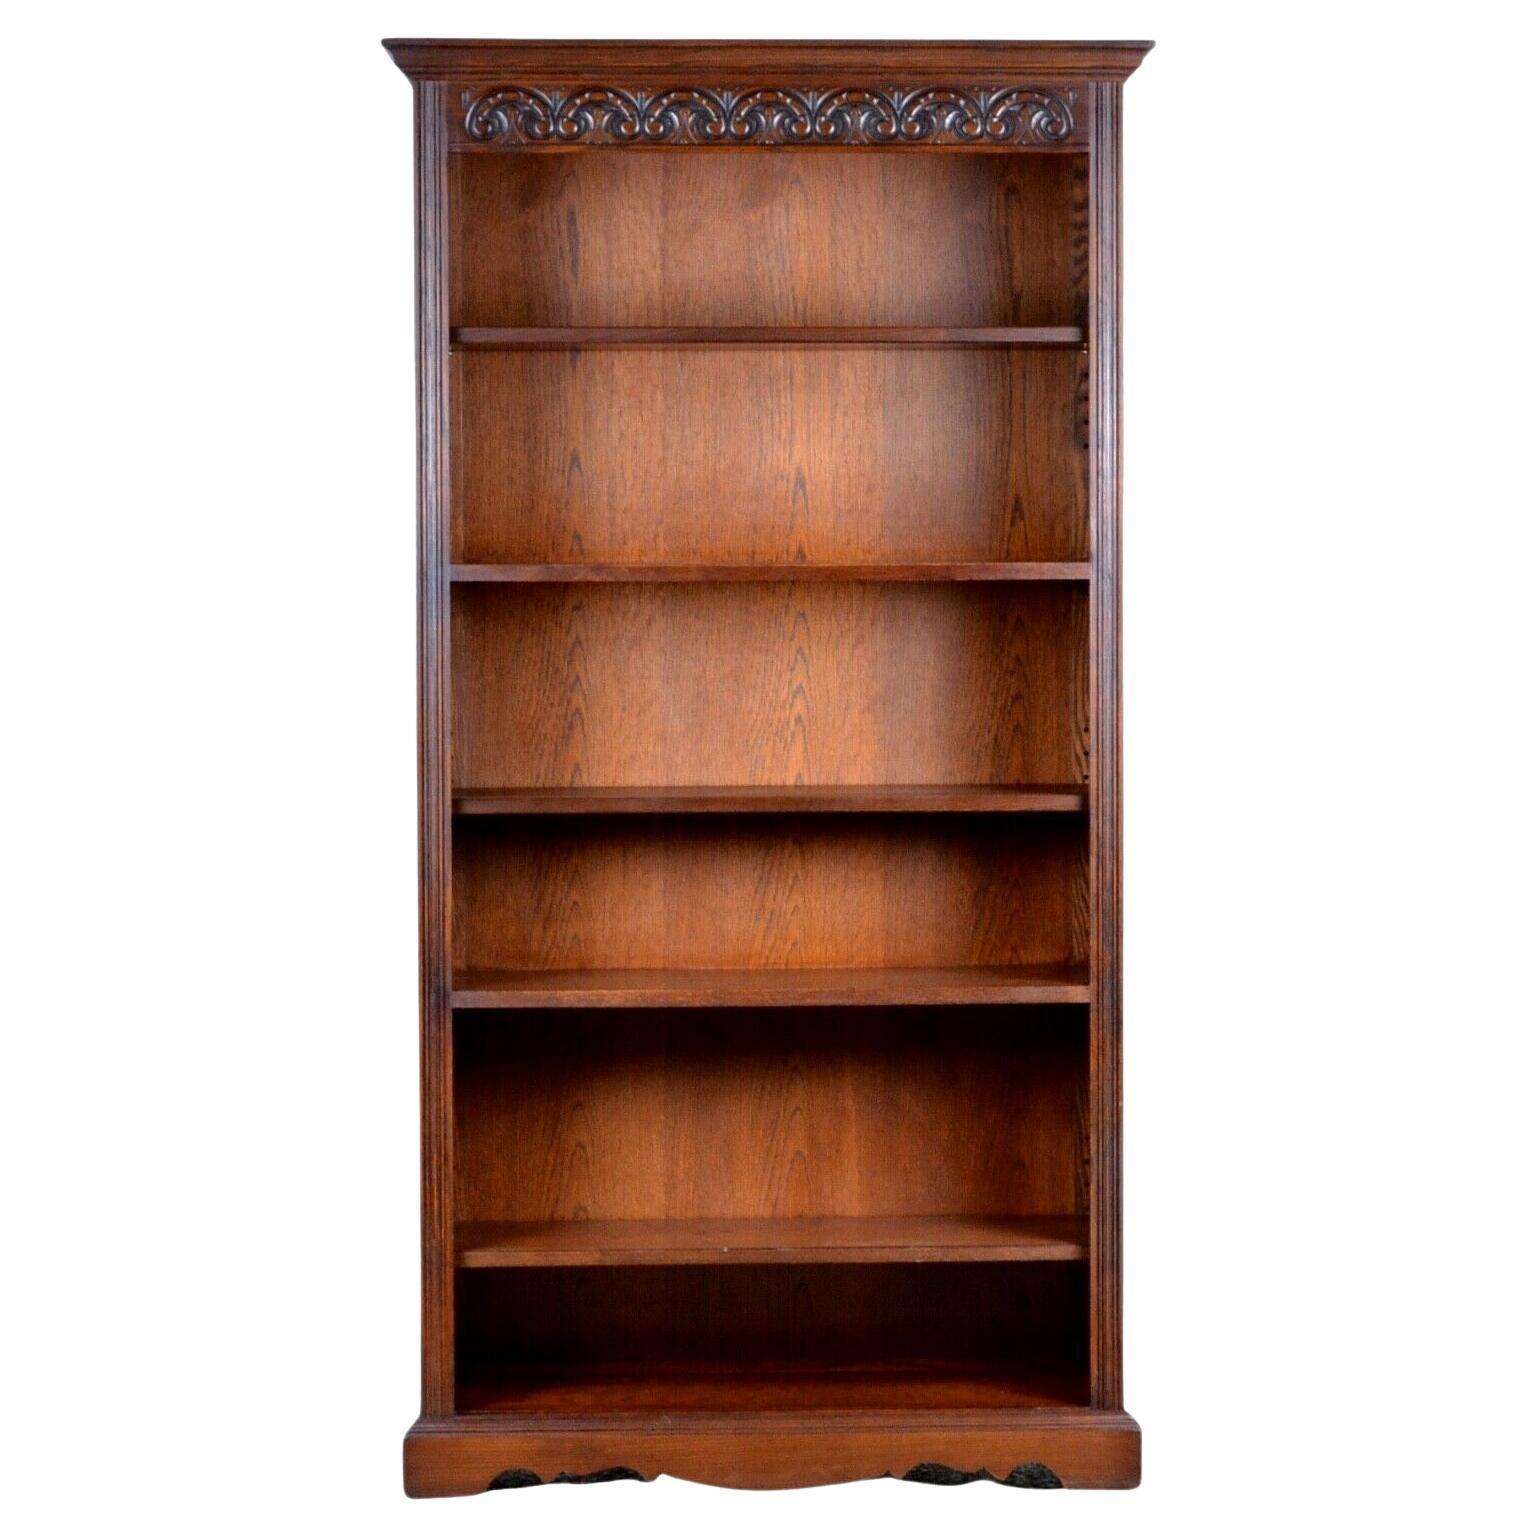 Old Charm Made in England Oak Timber Library Bookcases Adjustable Shelves